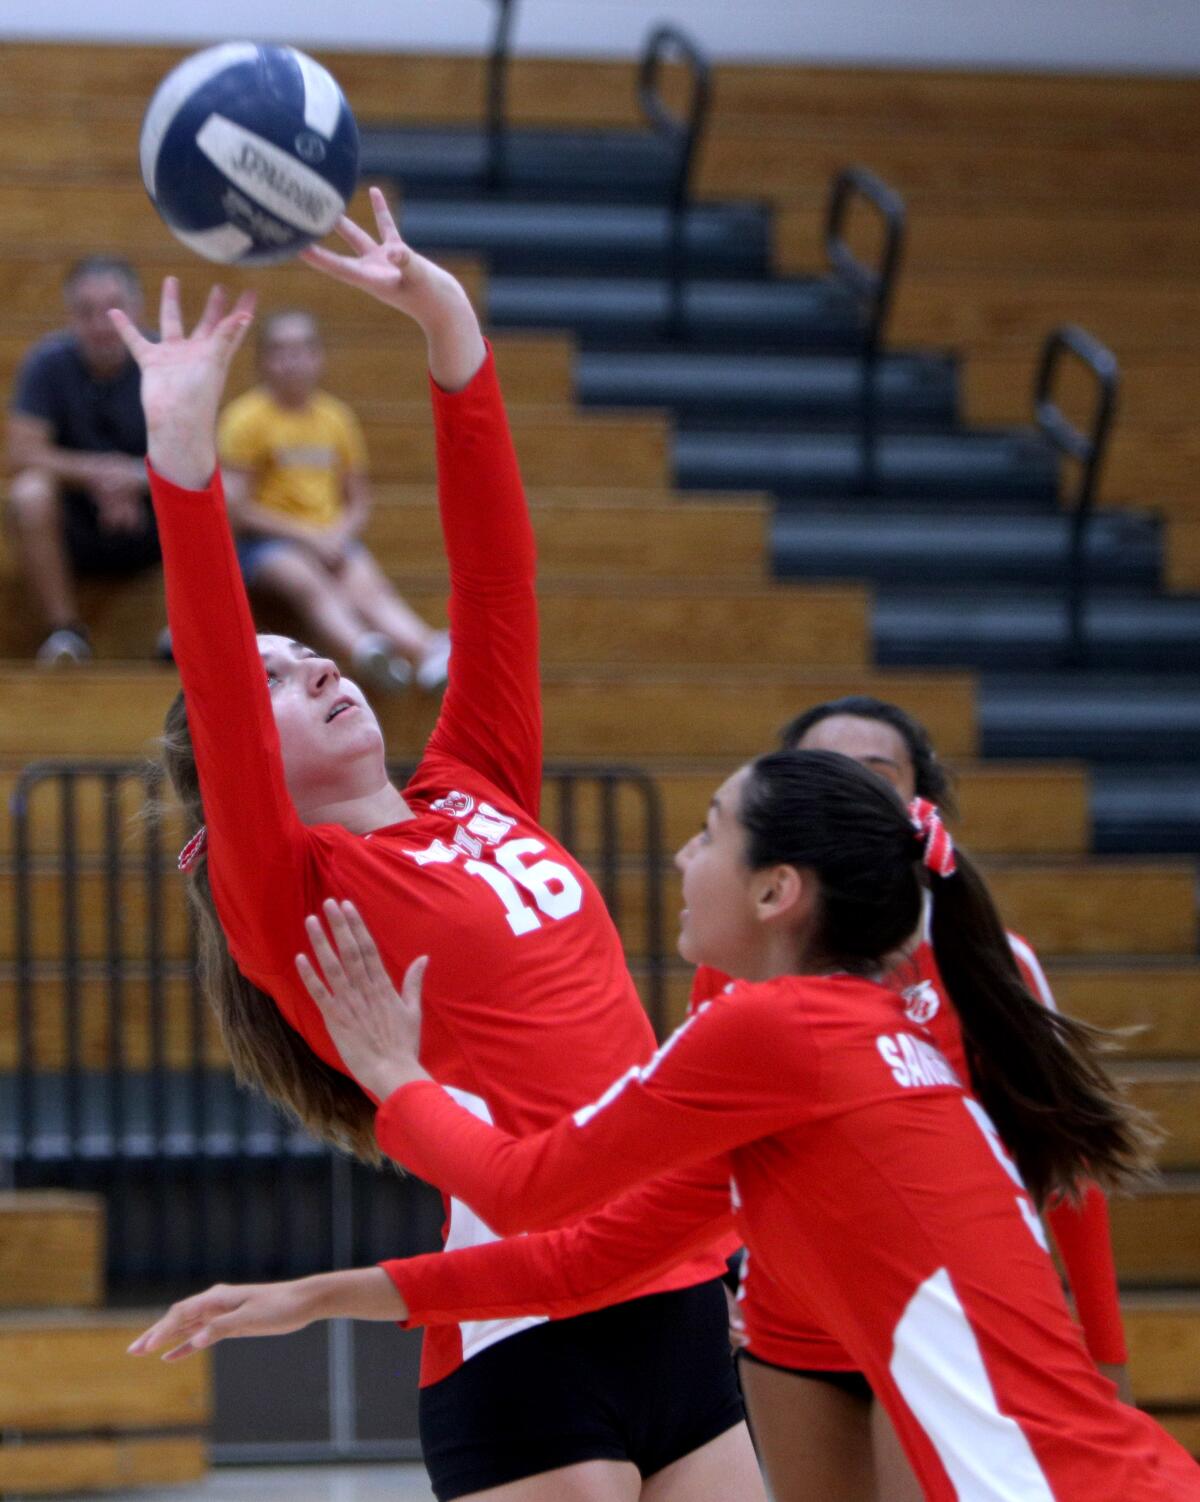 Burroughs High School volleyball player Milana Abrahamian sets the ball in away game vs. Crescenta Valley High School, in La Crescenta on Thursday, Sept. 12, 2019.